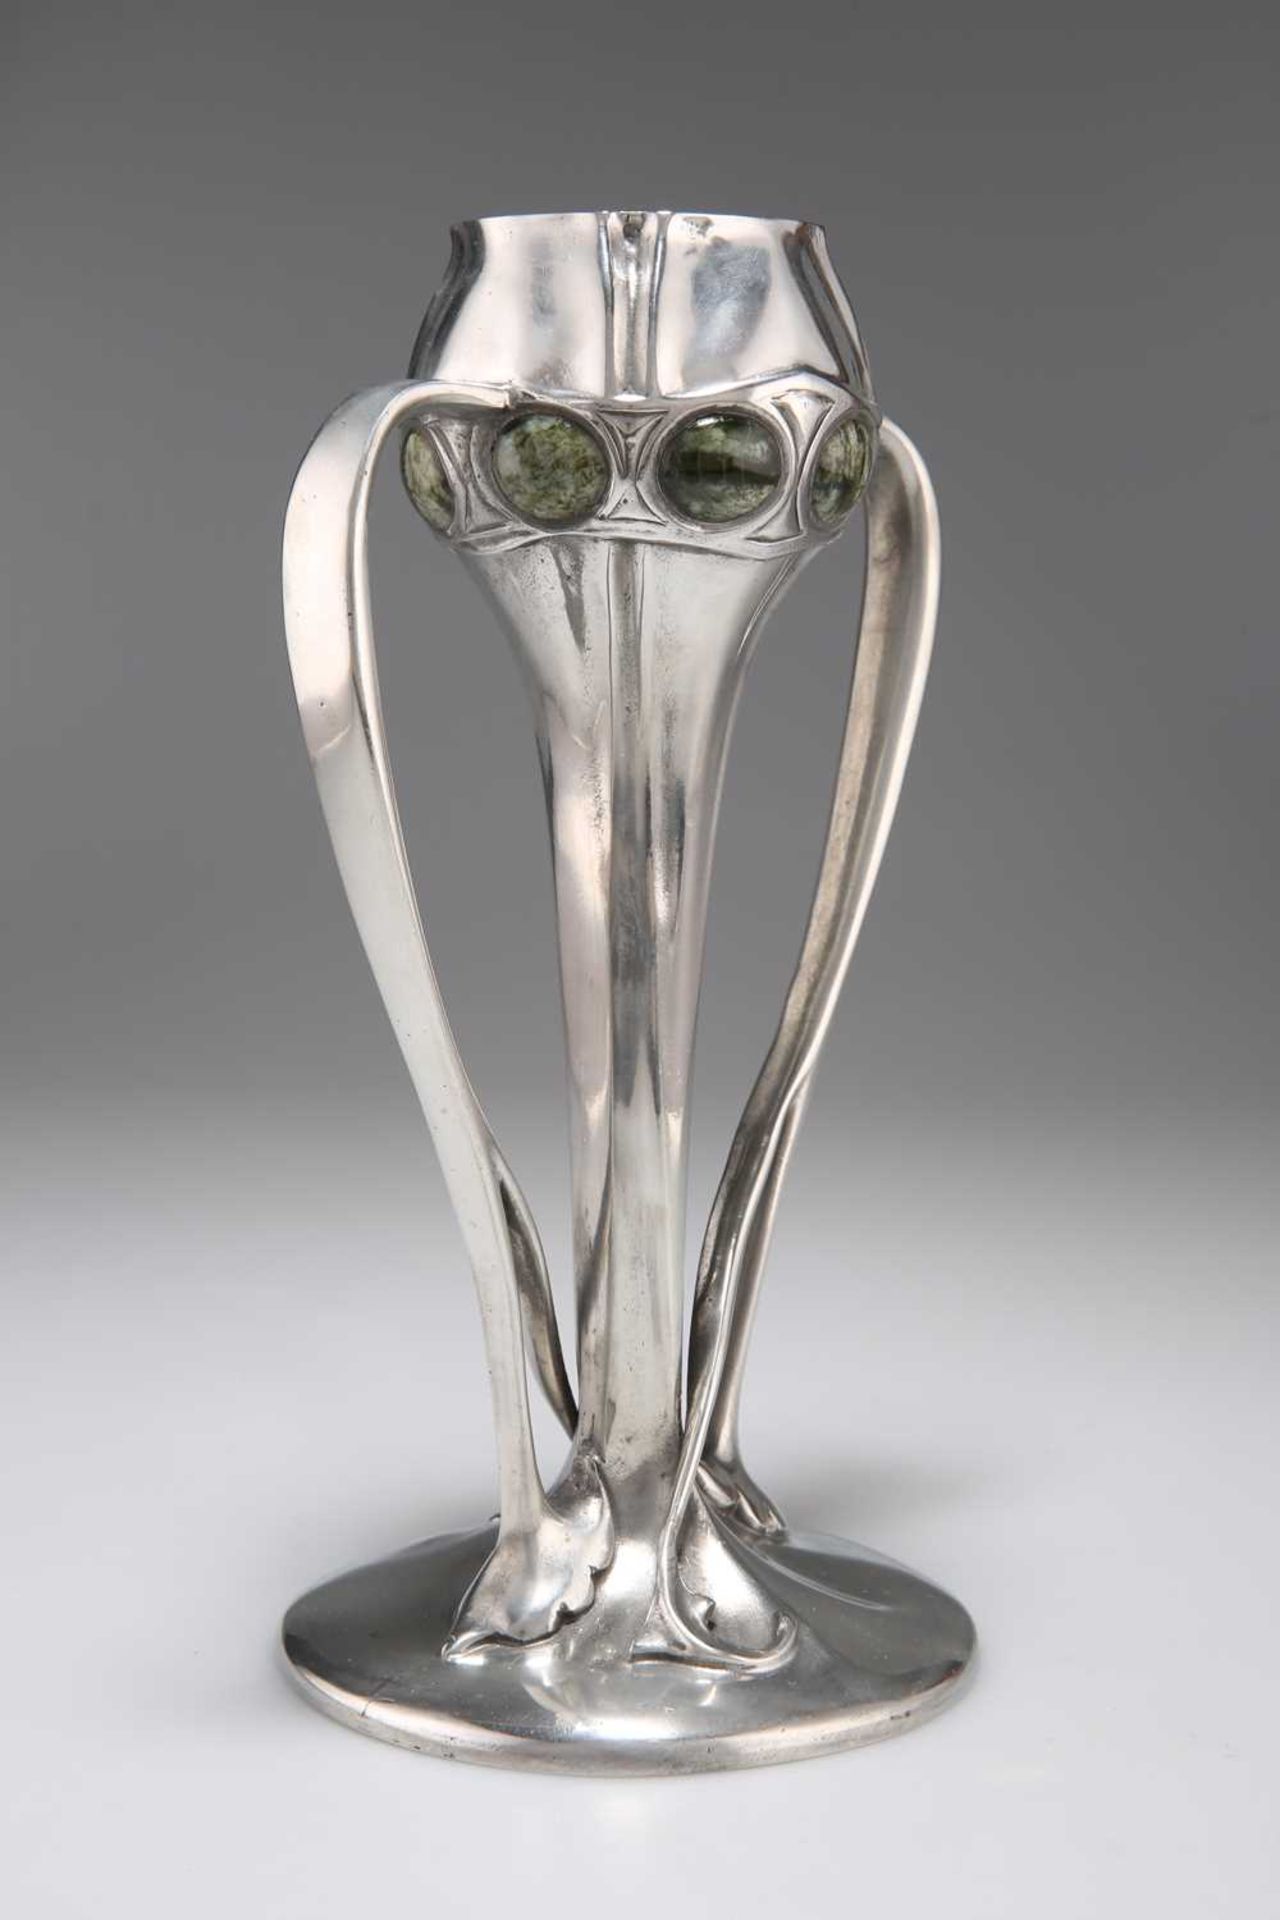 ARCHIBALD KNOX (1864-1933) FOR LIBERTY & CO, A RARE TUDRIC PEWTER AND CONNEMARA MARBLE TULIP VASE - Image 2 of 3